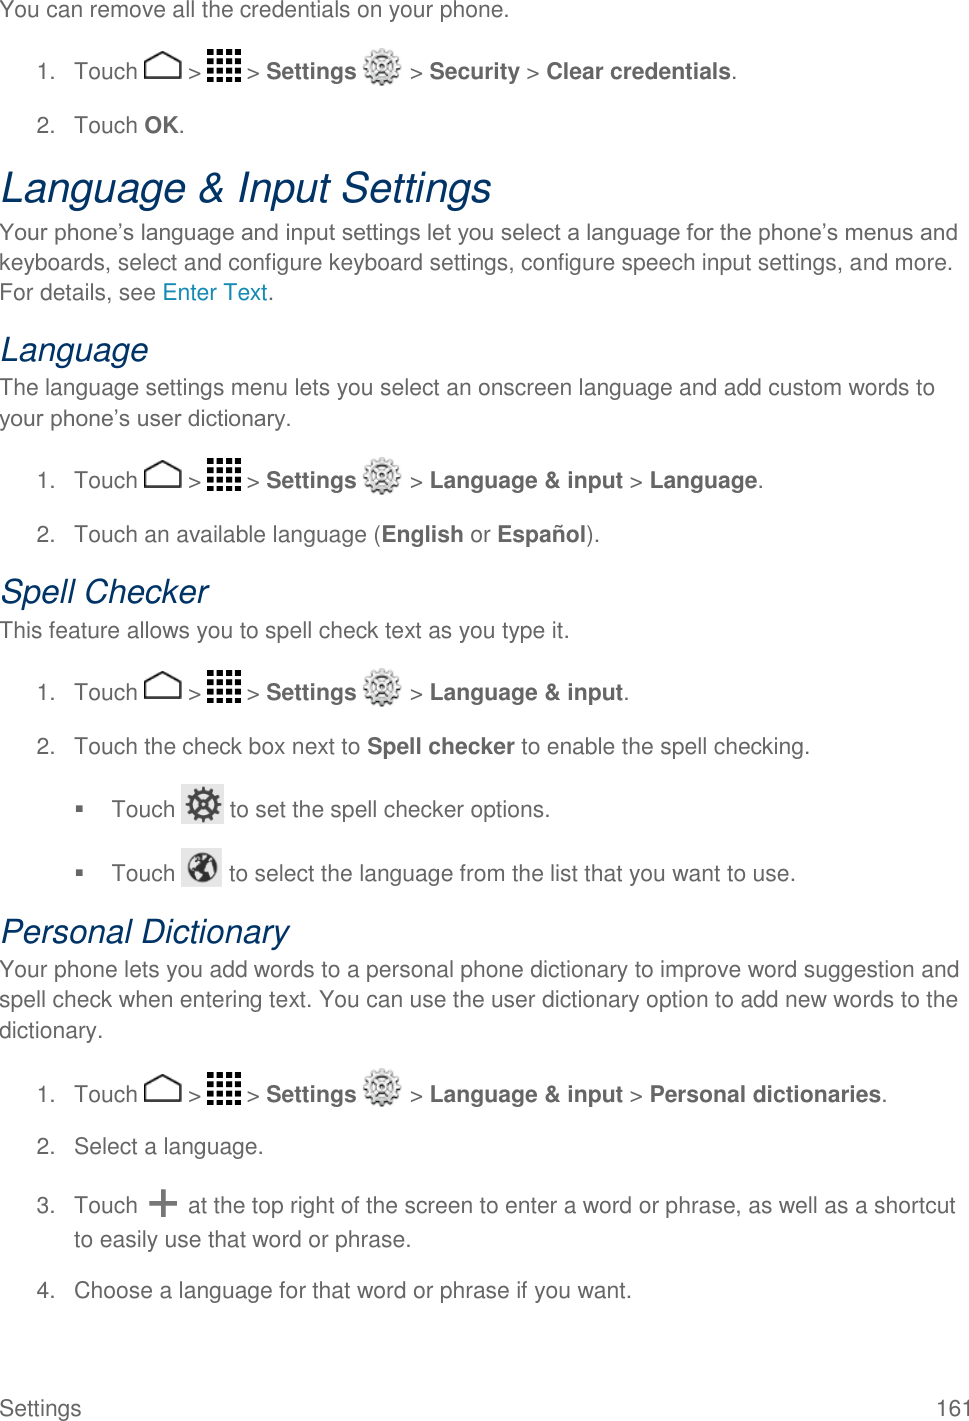 Settings  161 You can remove all the credentials on your phone. 1.  Touch   &gt;   &gt; Settings   &gt; Security &gt; Clear credentials. 2.  Touch OK. Language &amp; Input Settings Your phone’s language and input settings let you select a language for the phone’s menus and keyboards, select and configure keyboard settings, configure speech input settings, and more. For details, see Enter Text. Language The language settings menu lets you select an onscreen language and add custom words to your phone’s user dictionary. 1.  Touch   &gt;   &gt; Settings   &gt; Language &amp; input &gt; Language. 2.  Touch an available language (English or Español). Spell Checker This feature allows you to spell check text as you type it. 1.  Touch   &gt;   &gt; Settings   &gt; Language &amp; input. 2.  Touch the check box next to Spell checker to enable the spell checking.   Touch   to set the spell checker options.   Touch   to select the language from the list that you want to use. Personal Dictionary Your phone lets you add words to a personal phone dictionary to improve word suggestion and spell check when entering text. You can use the user dictionary option to add new words to the dictionary. 1.  Touch   &gt;   &gt; Settings   &gt; Language &amp; input &gt; Personal dictionaries. 2.  Select a language. 3.  Touch   at the top right of the screen to enter a word or phrase, as well as a shortcut to easily use that word or phrase. 4.  Choose a language for that word or phrase if you want. 